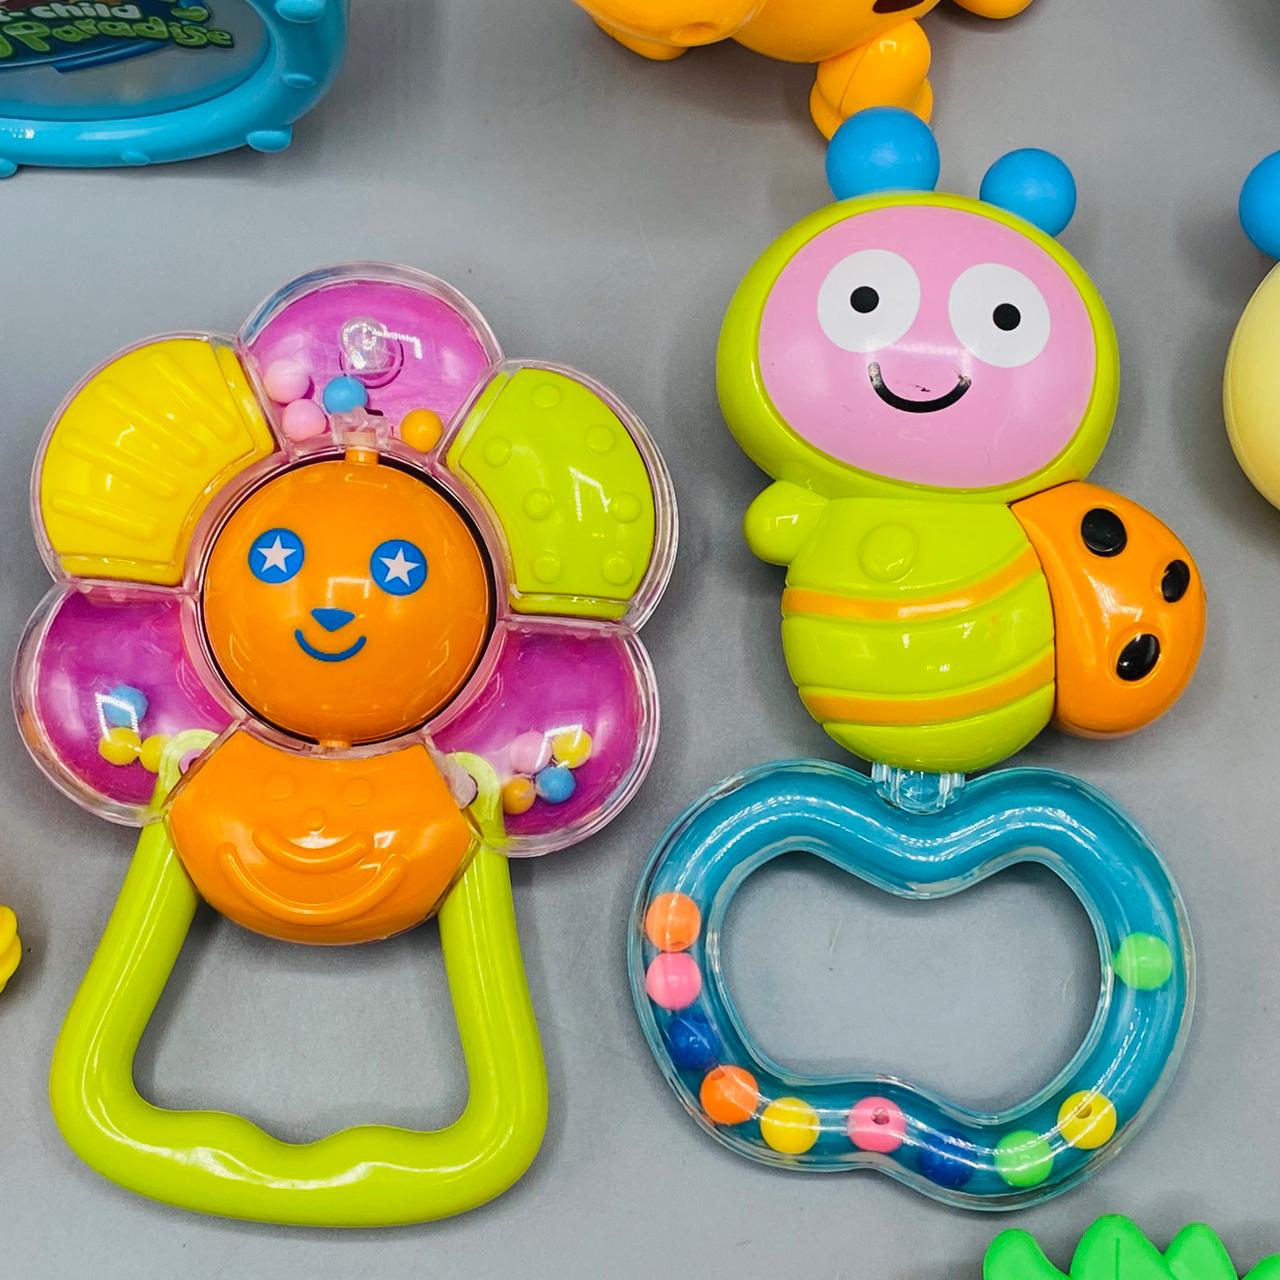 10 pieces baby rattle play set